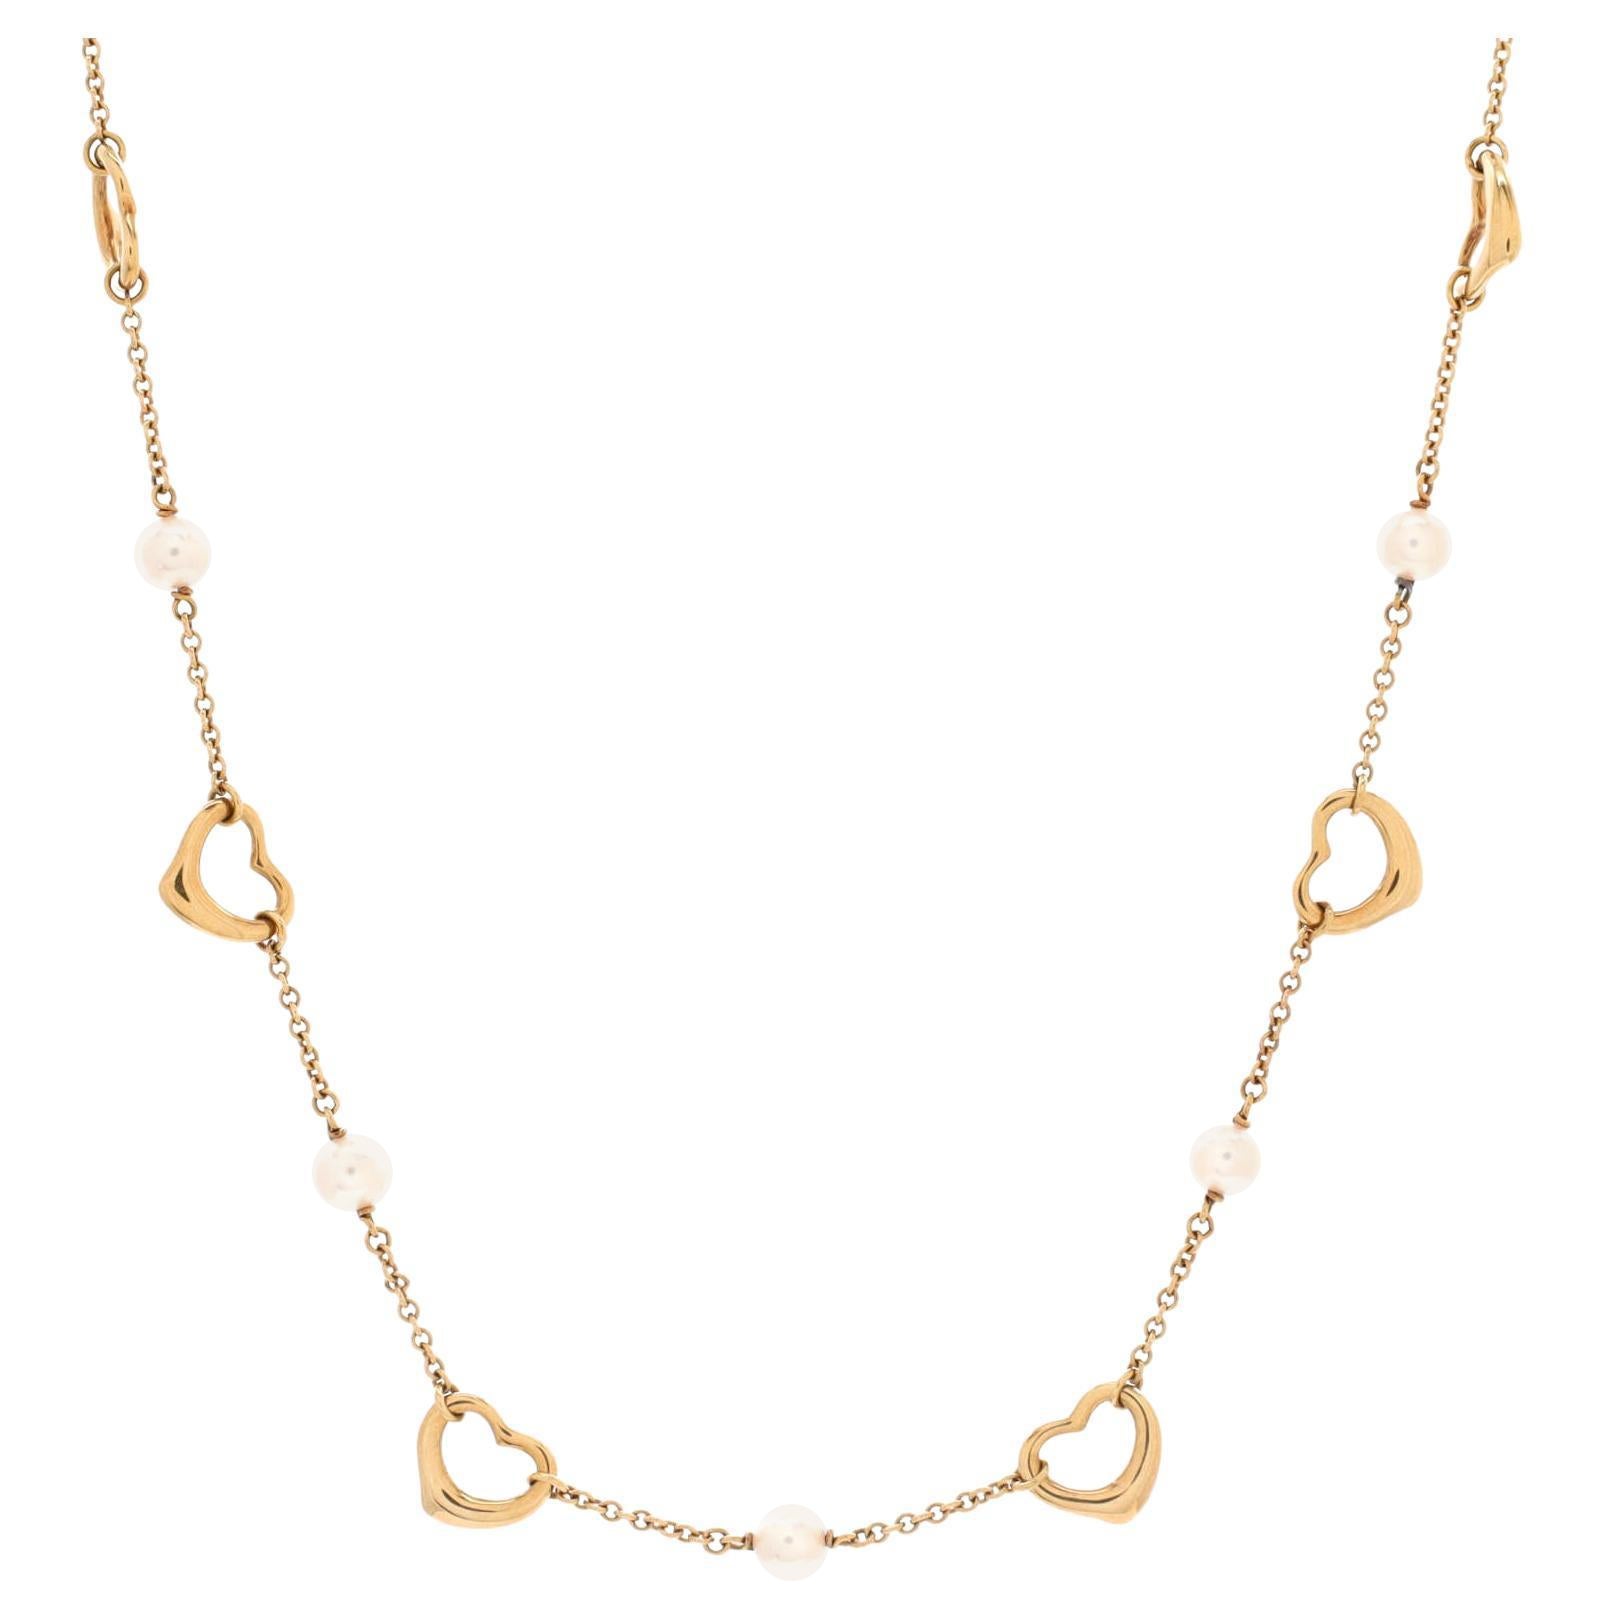 Tiffany & Co. Elsa Peretti Open Heart Station Necklace 18K Yellow Gold and Pearl